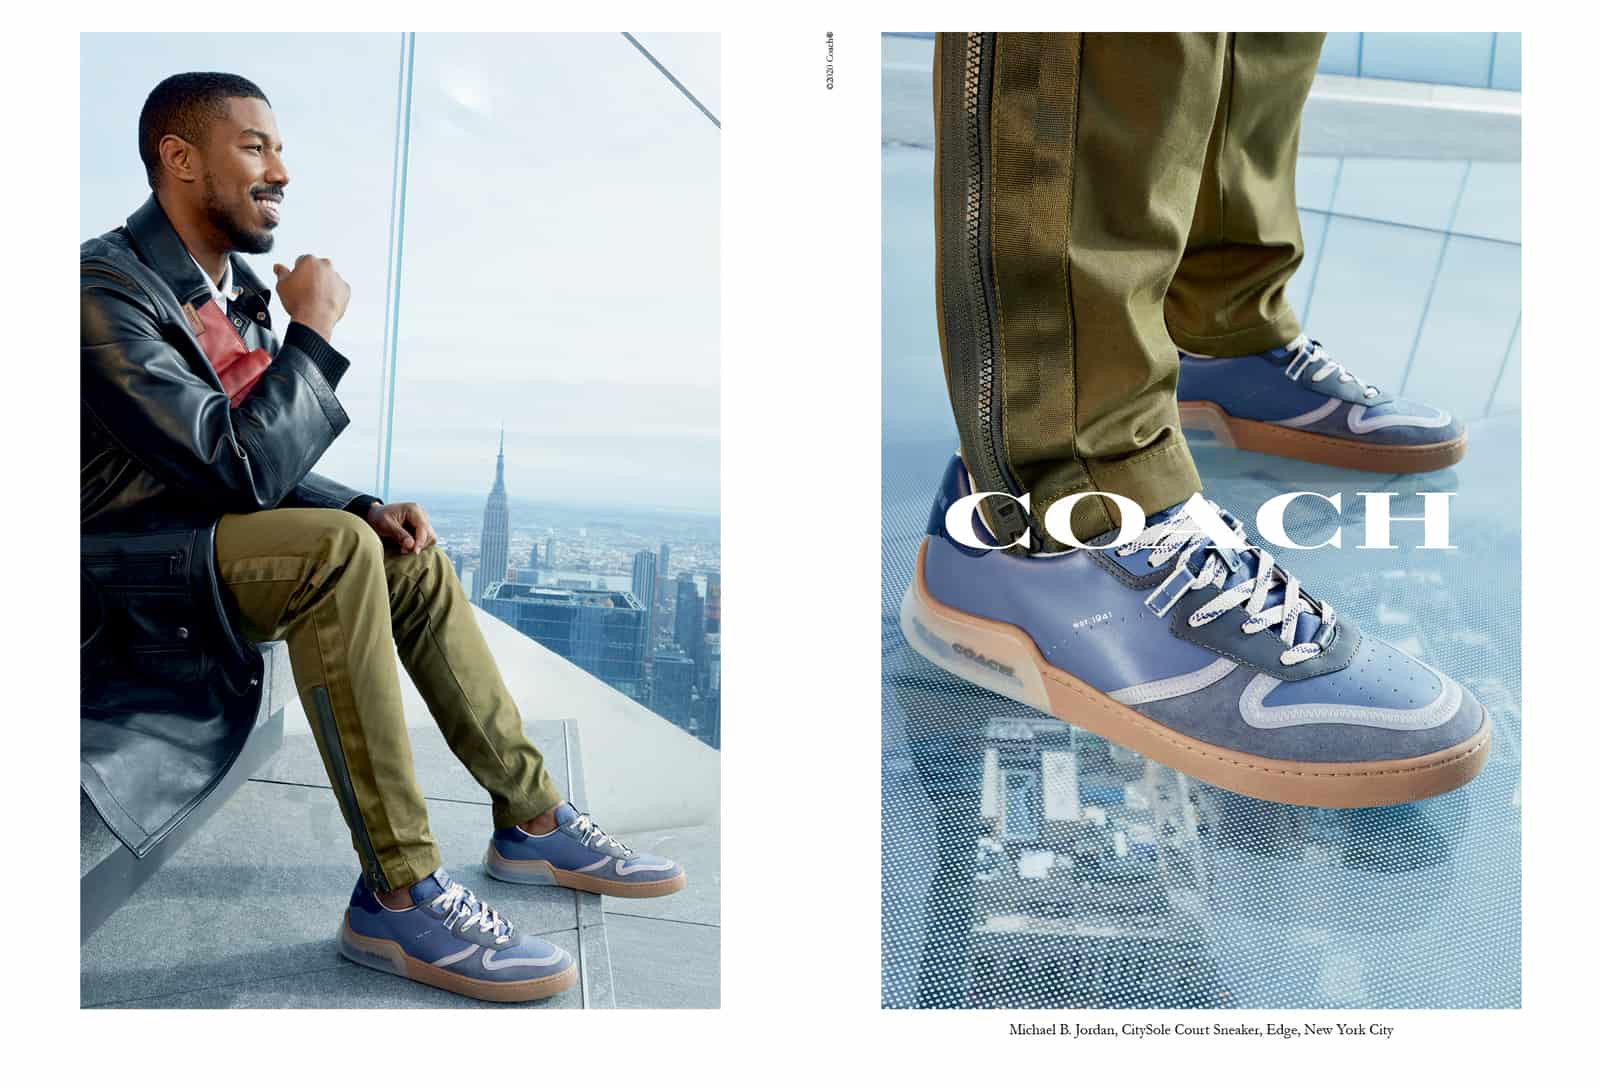 COACH LAUNCHES NEW SNEAKER STYLE - MR Magazine